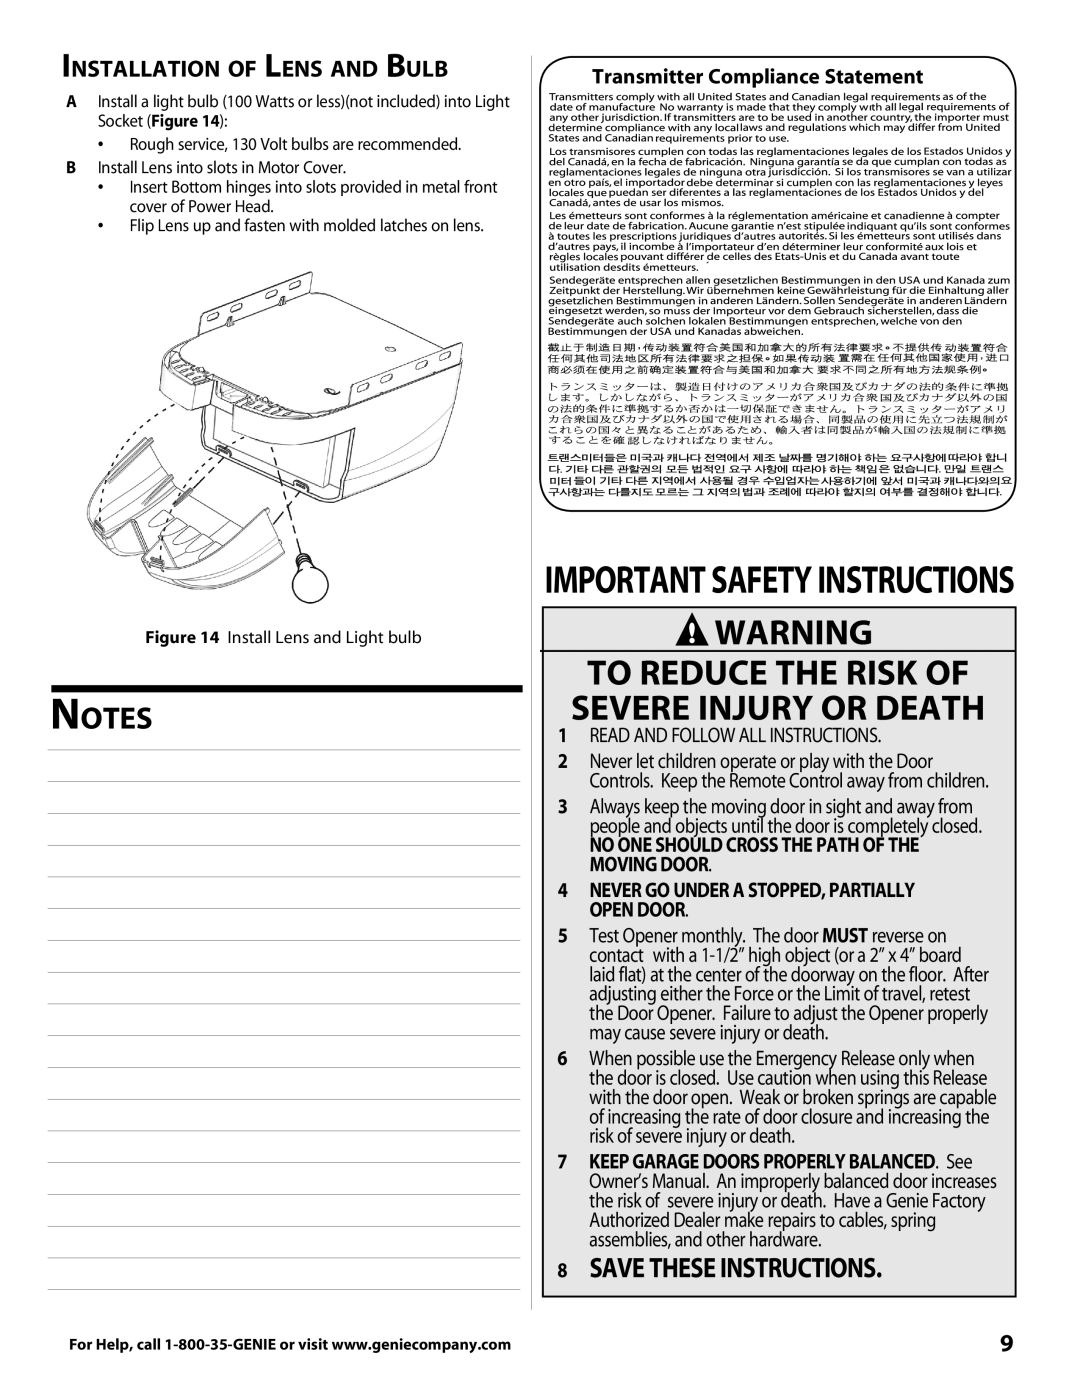 Genie 3681036666 warranty Important Safety Instructions, Installation of Lens and Bulb, Transmitter Compliance Statement 